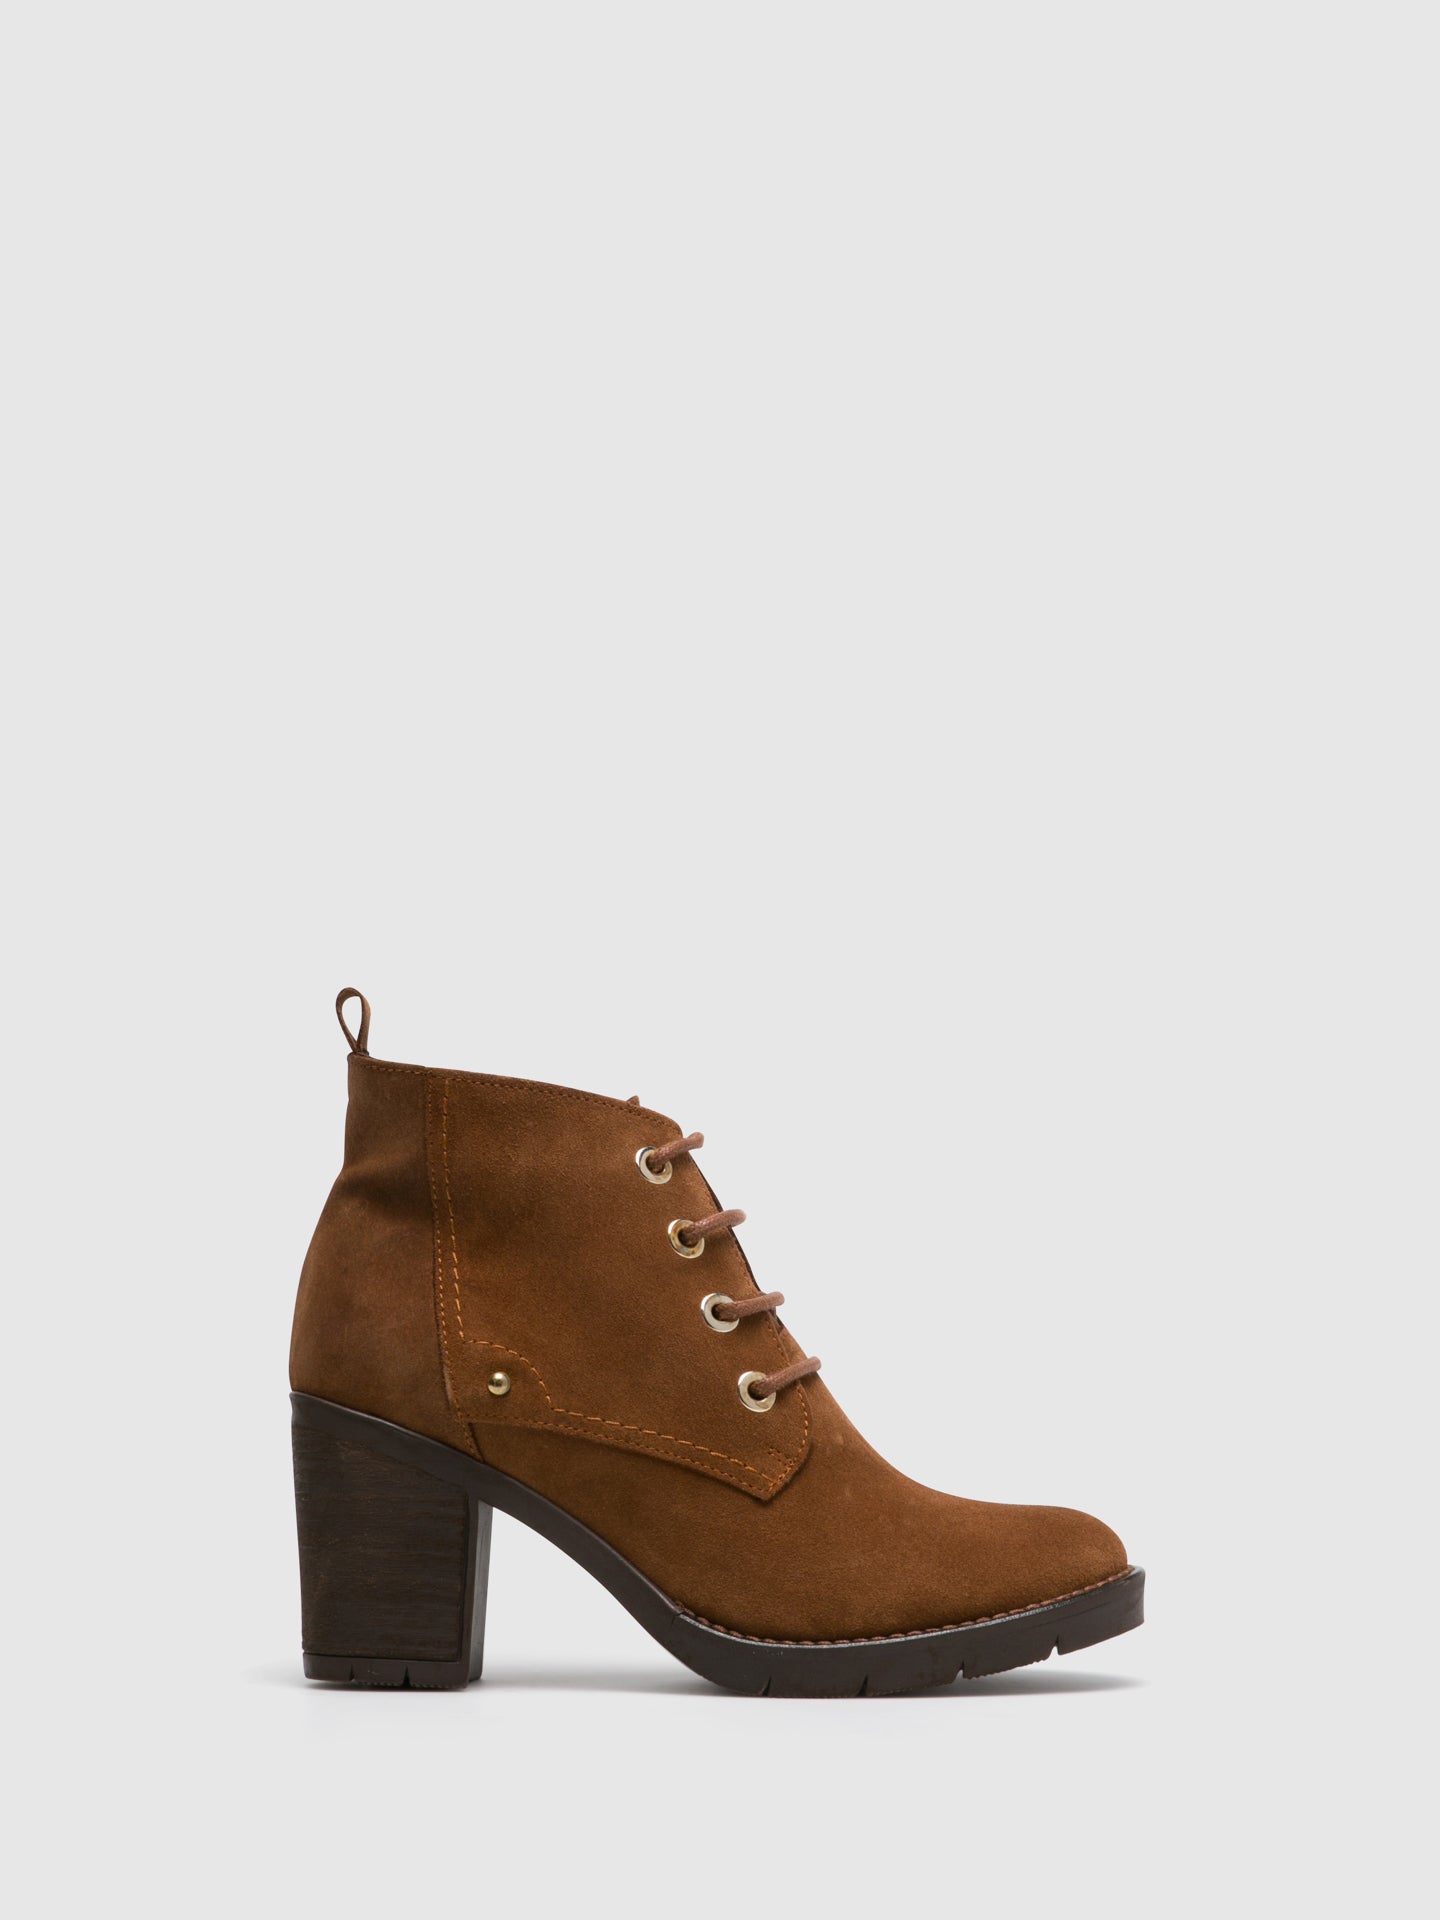 Foreva Peru Lace-up Ankle Boots